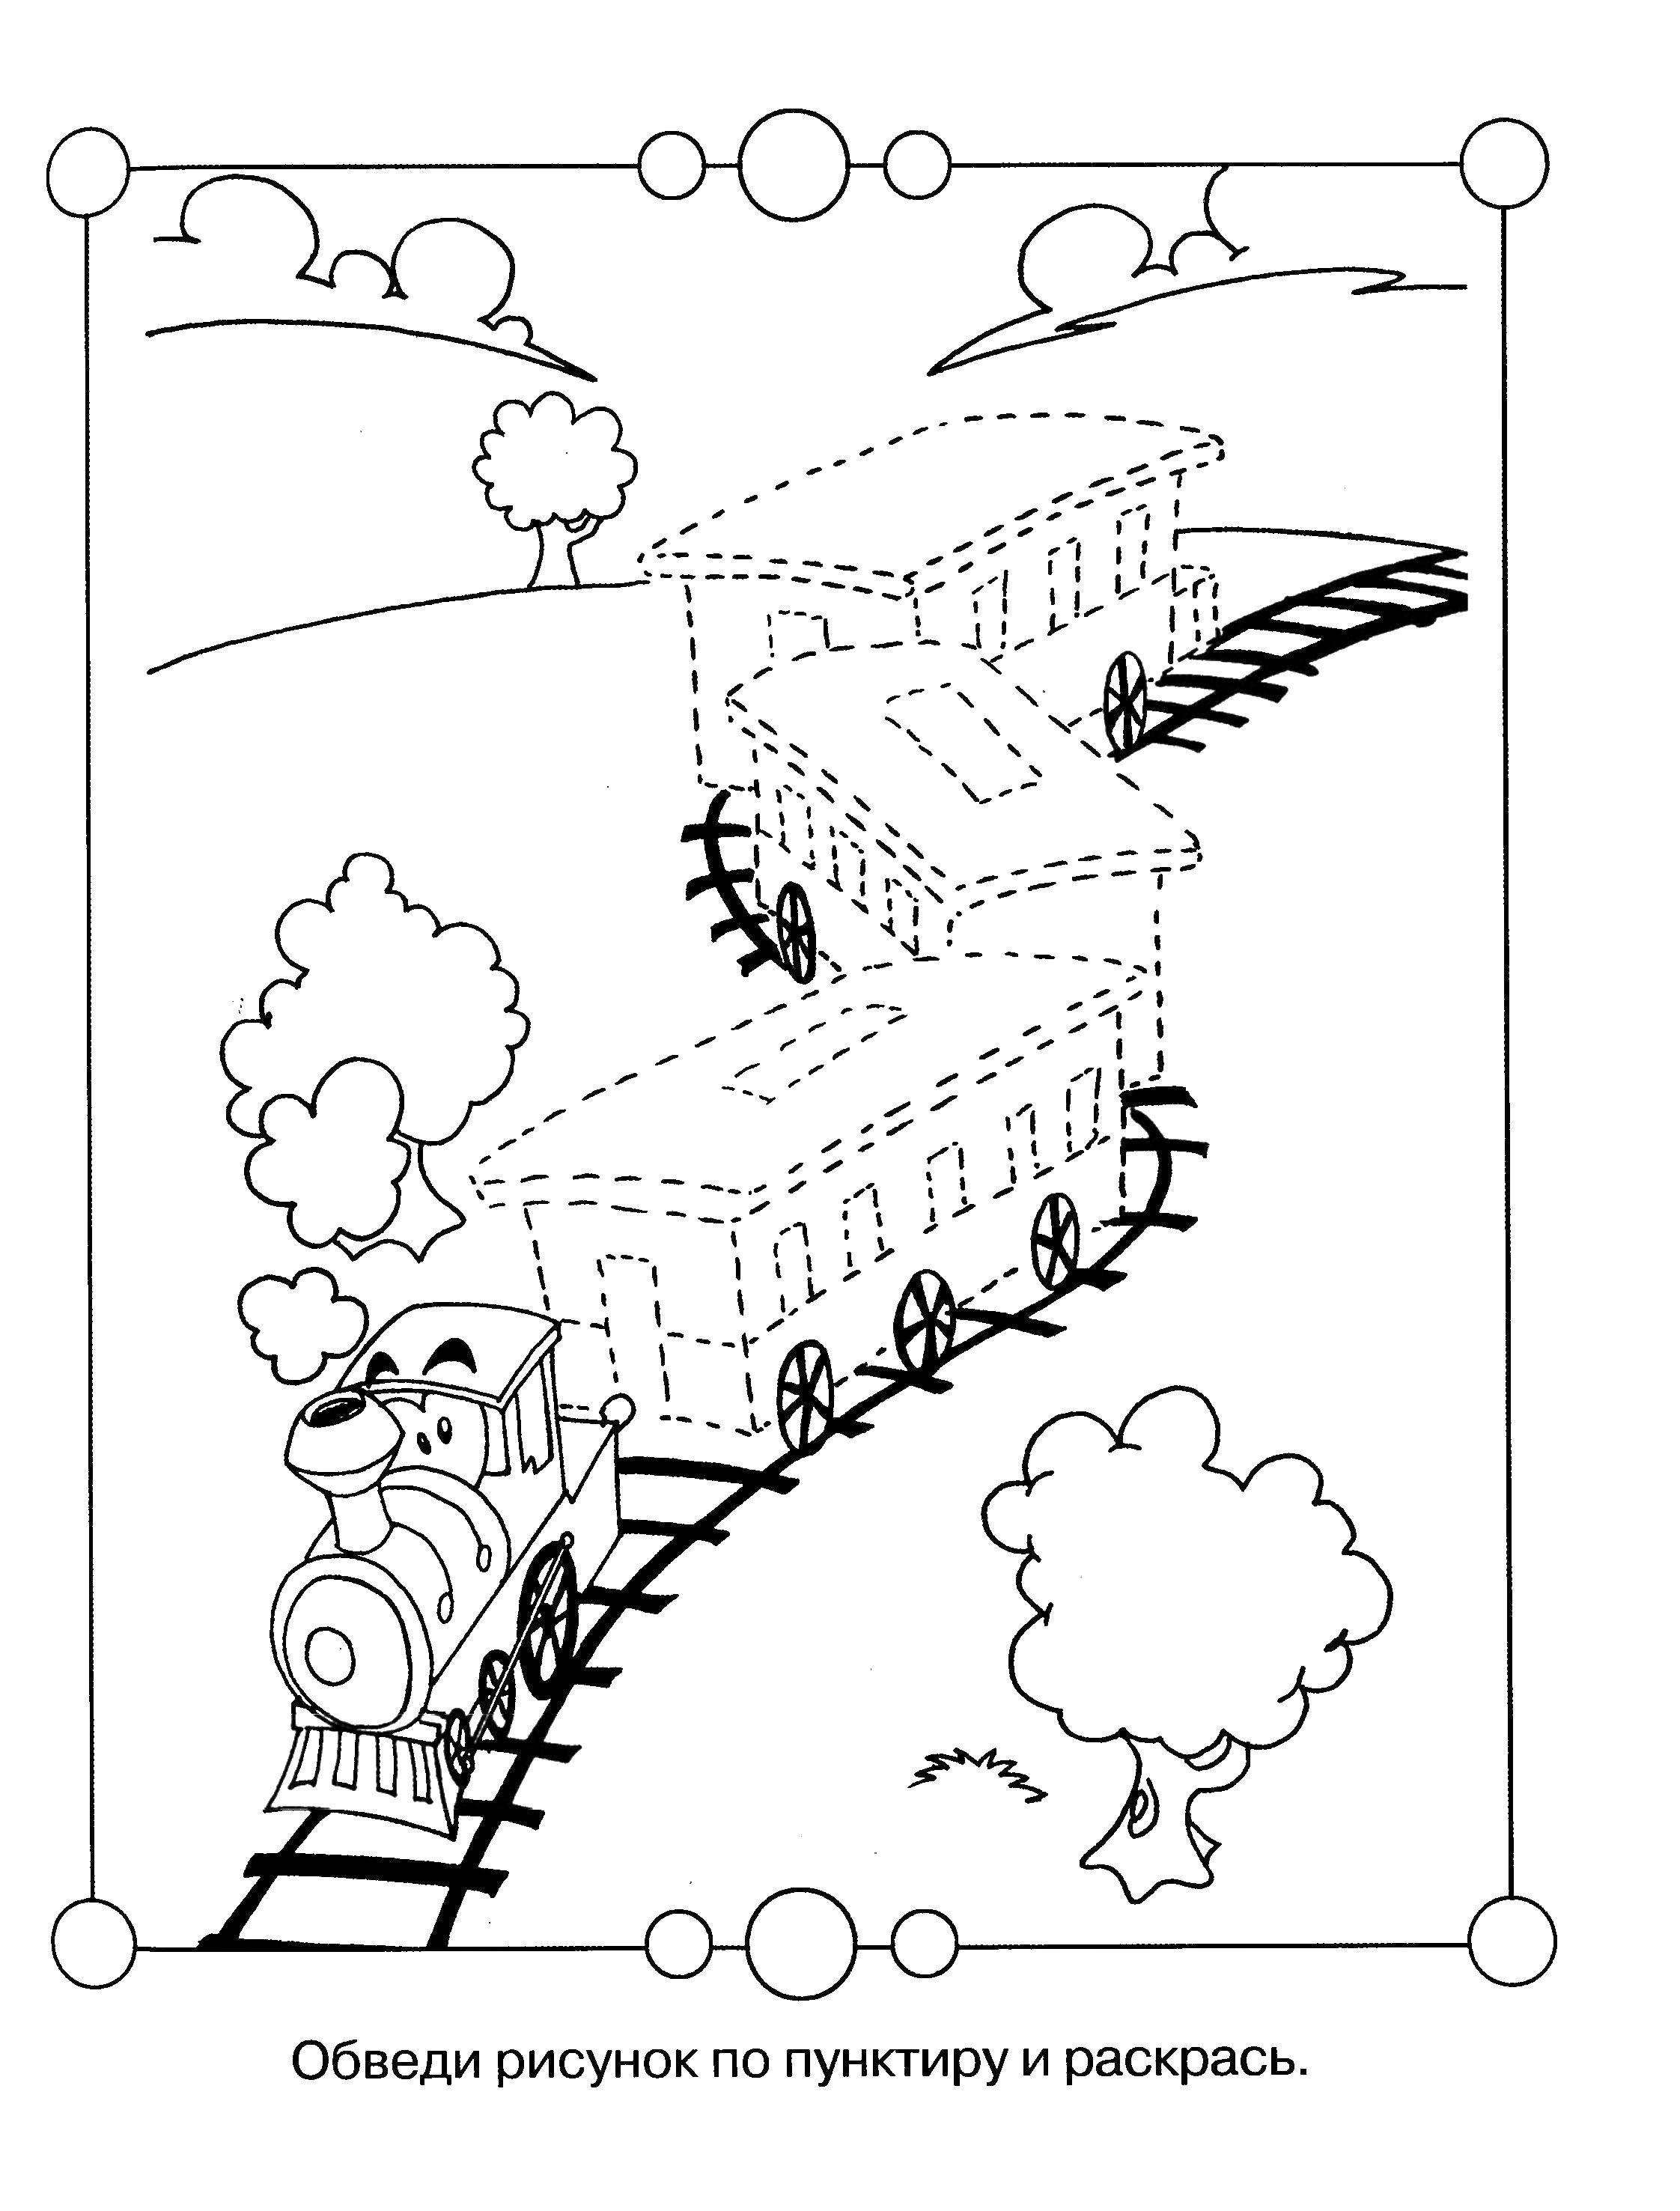 Coloring Trace the dotted lines and color. Category riddles for kids. Tags:  Pattern , stroke path.